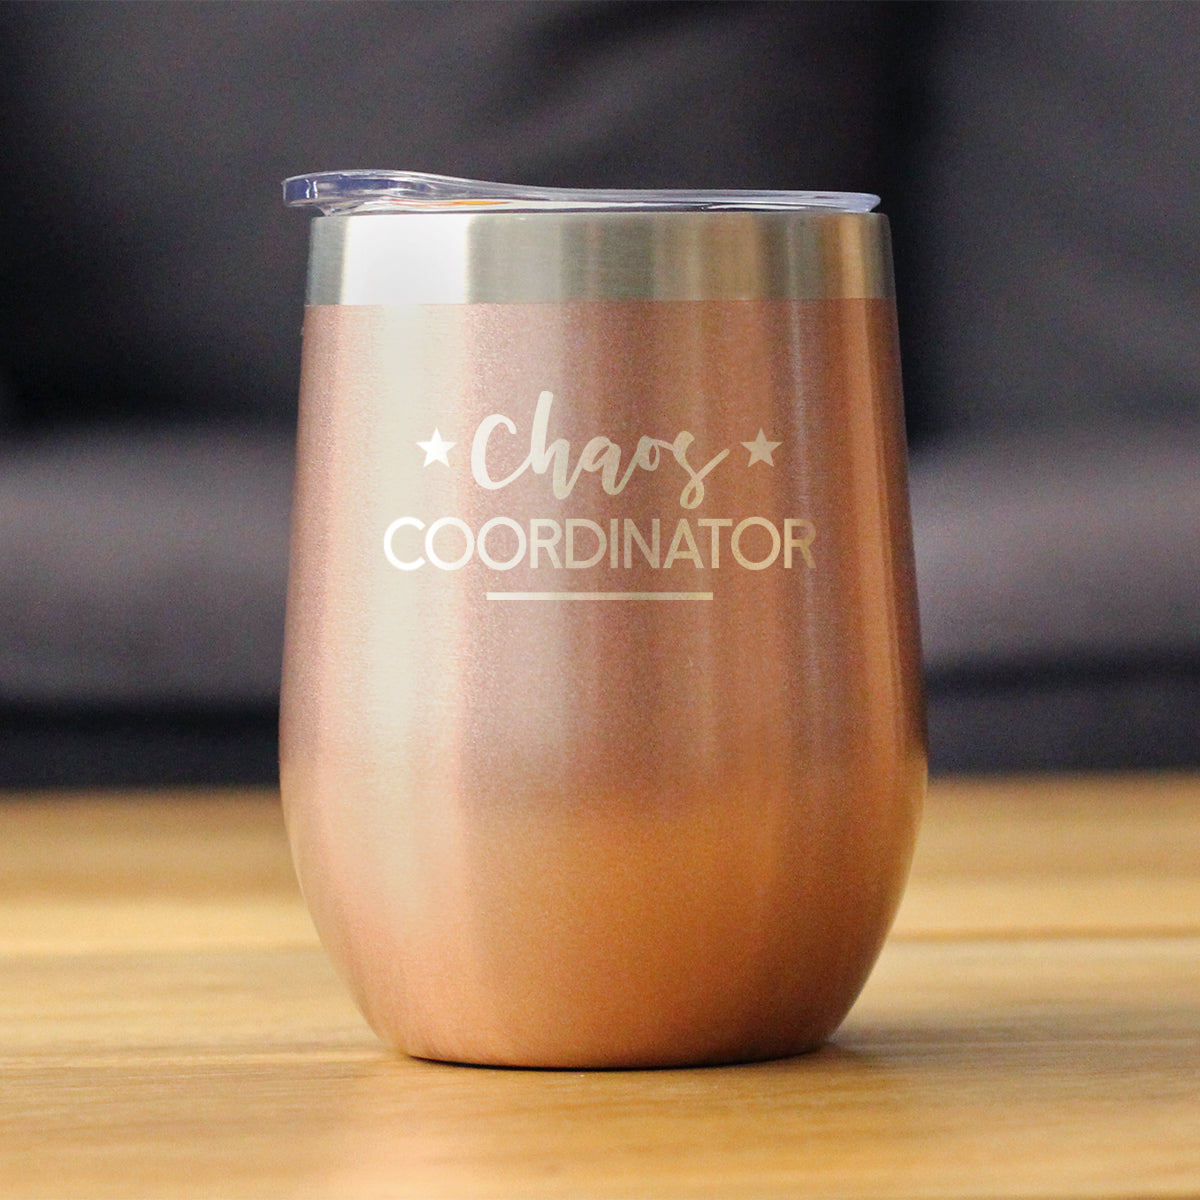 Chaos Coordinator - Wine Tumbler Glass with Sliding Lid - Stainless Steel Insulated Mug - Unique Gift for Bosses, Parents, and Teachers